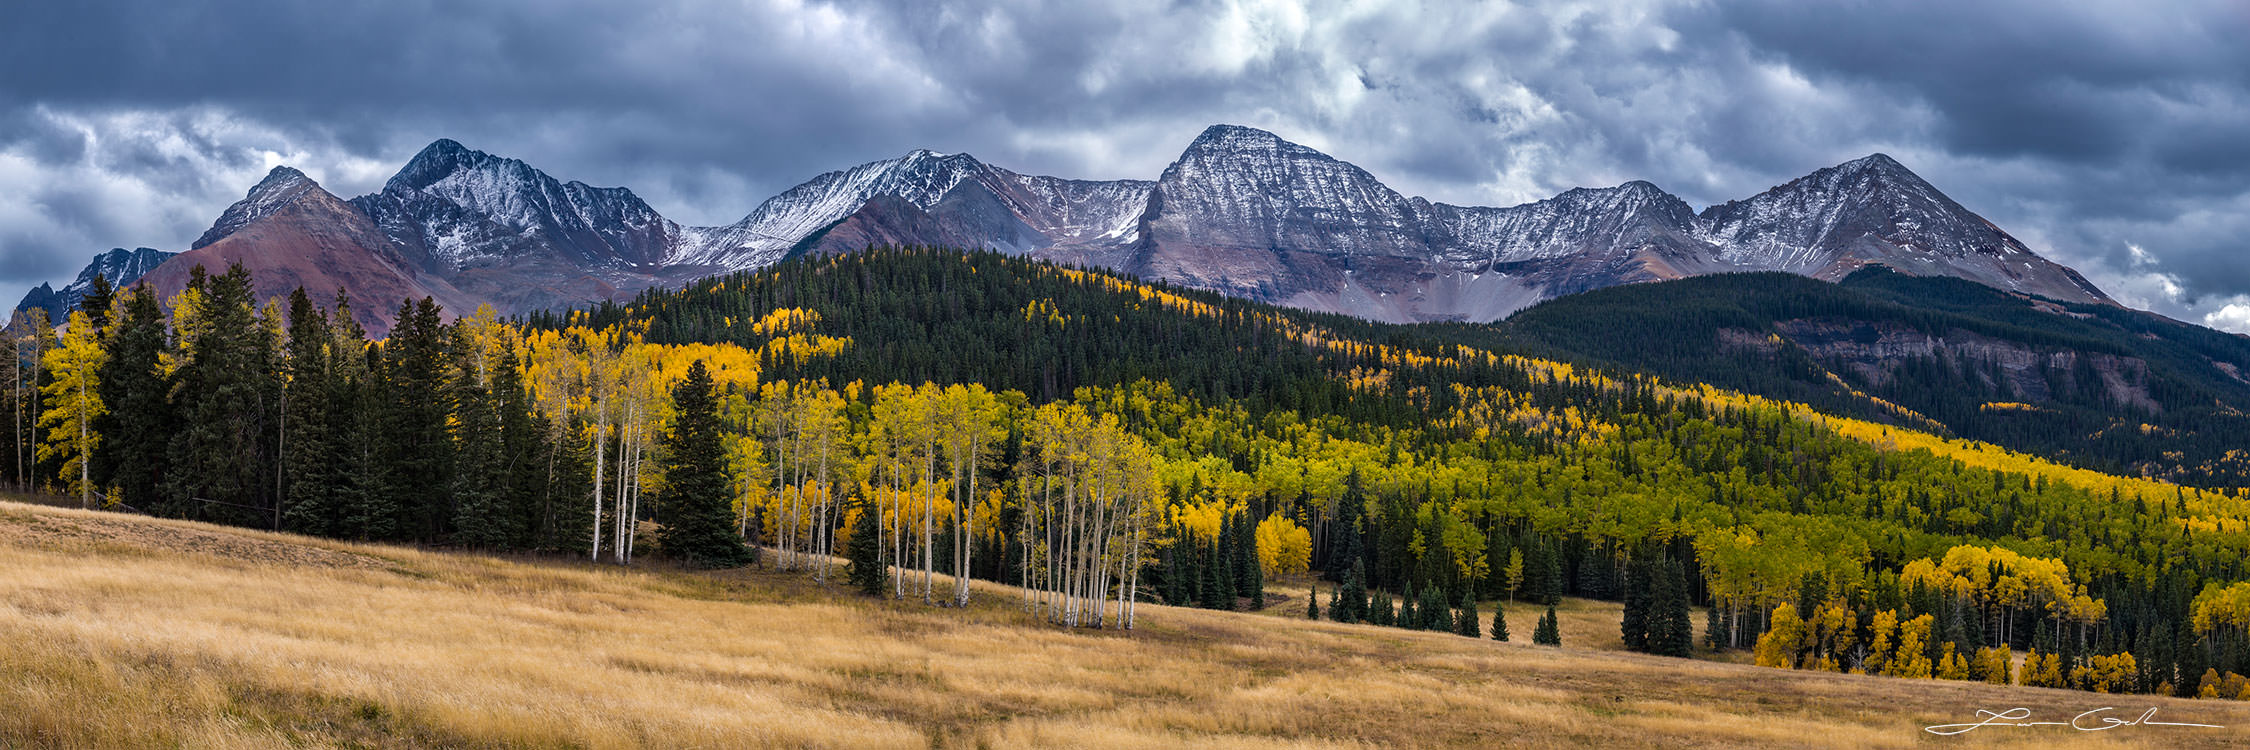 A panorama of yellow aspen trees, evergreen trees and beautiful mountains